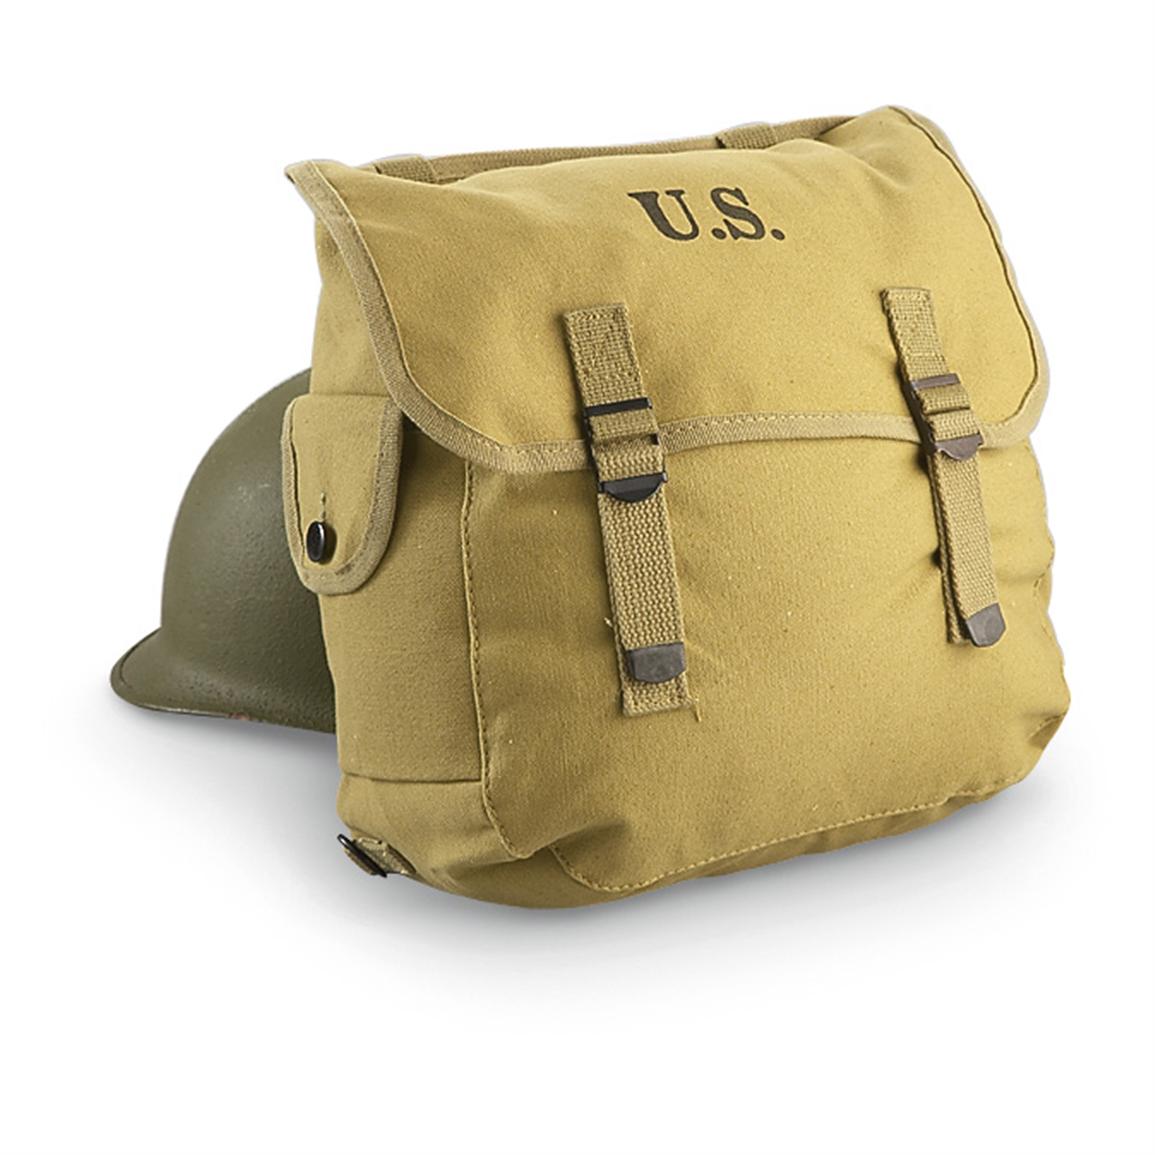 Reproduction U.S. Military surplus- style M36 Musette Bag, Khaki - 163121, Field Gear at ...